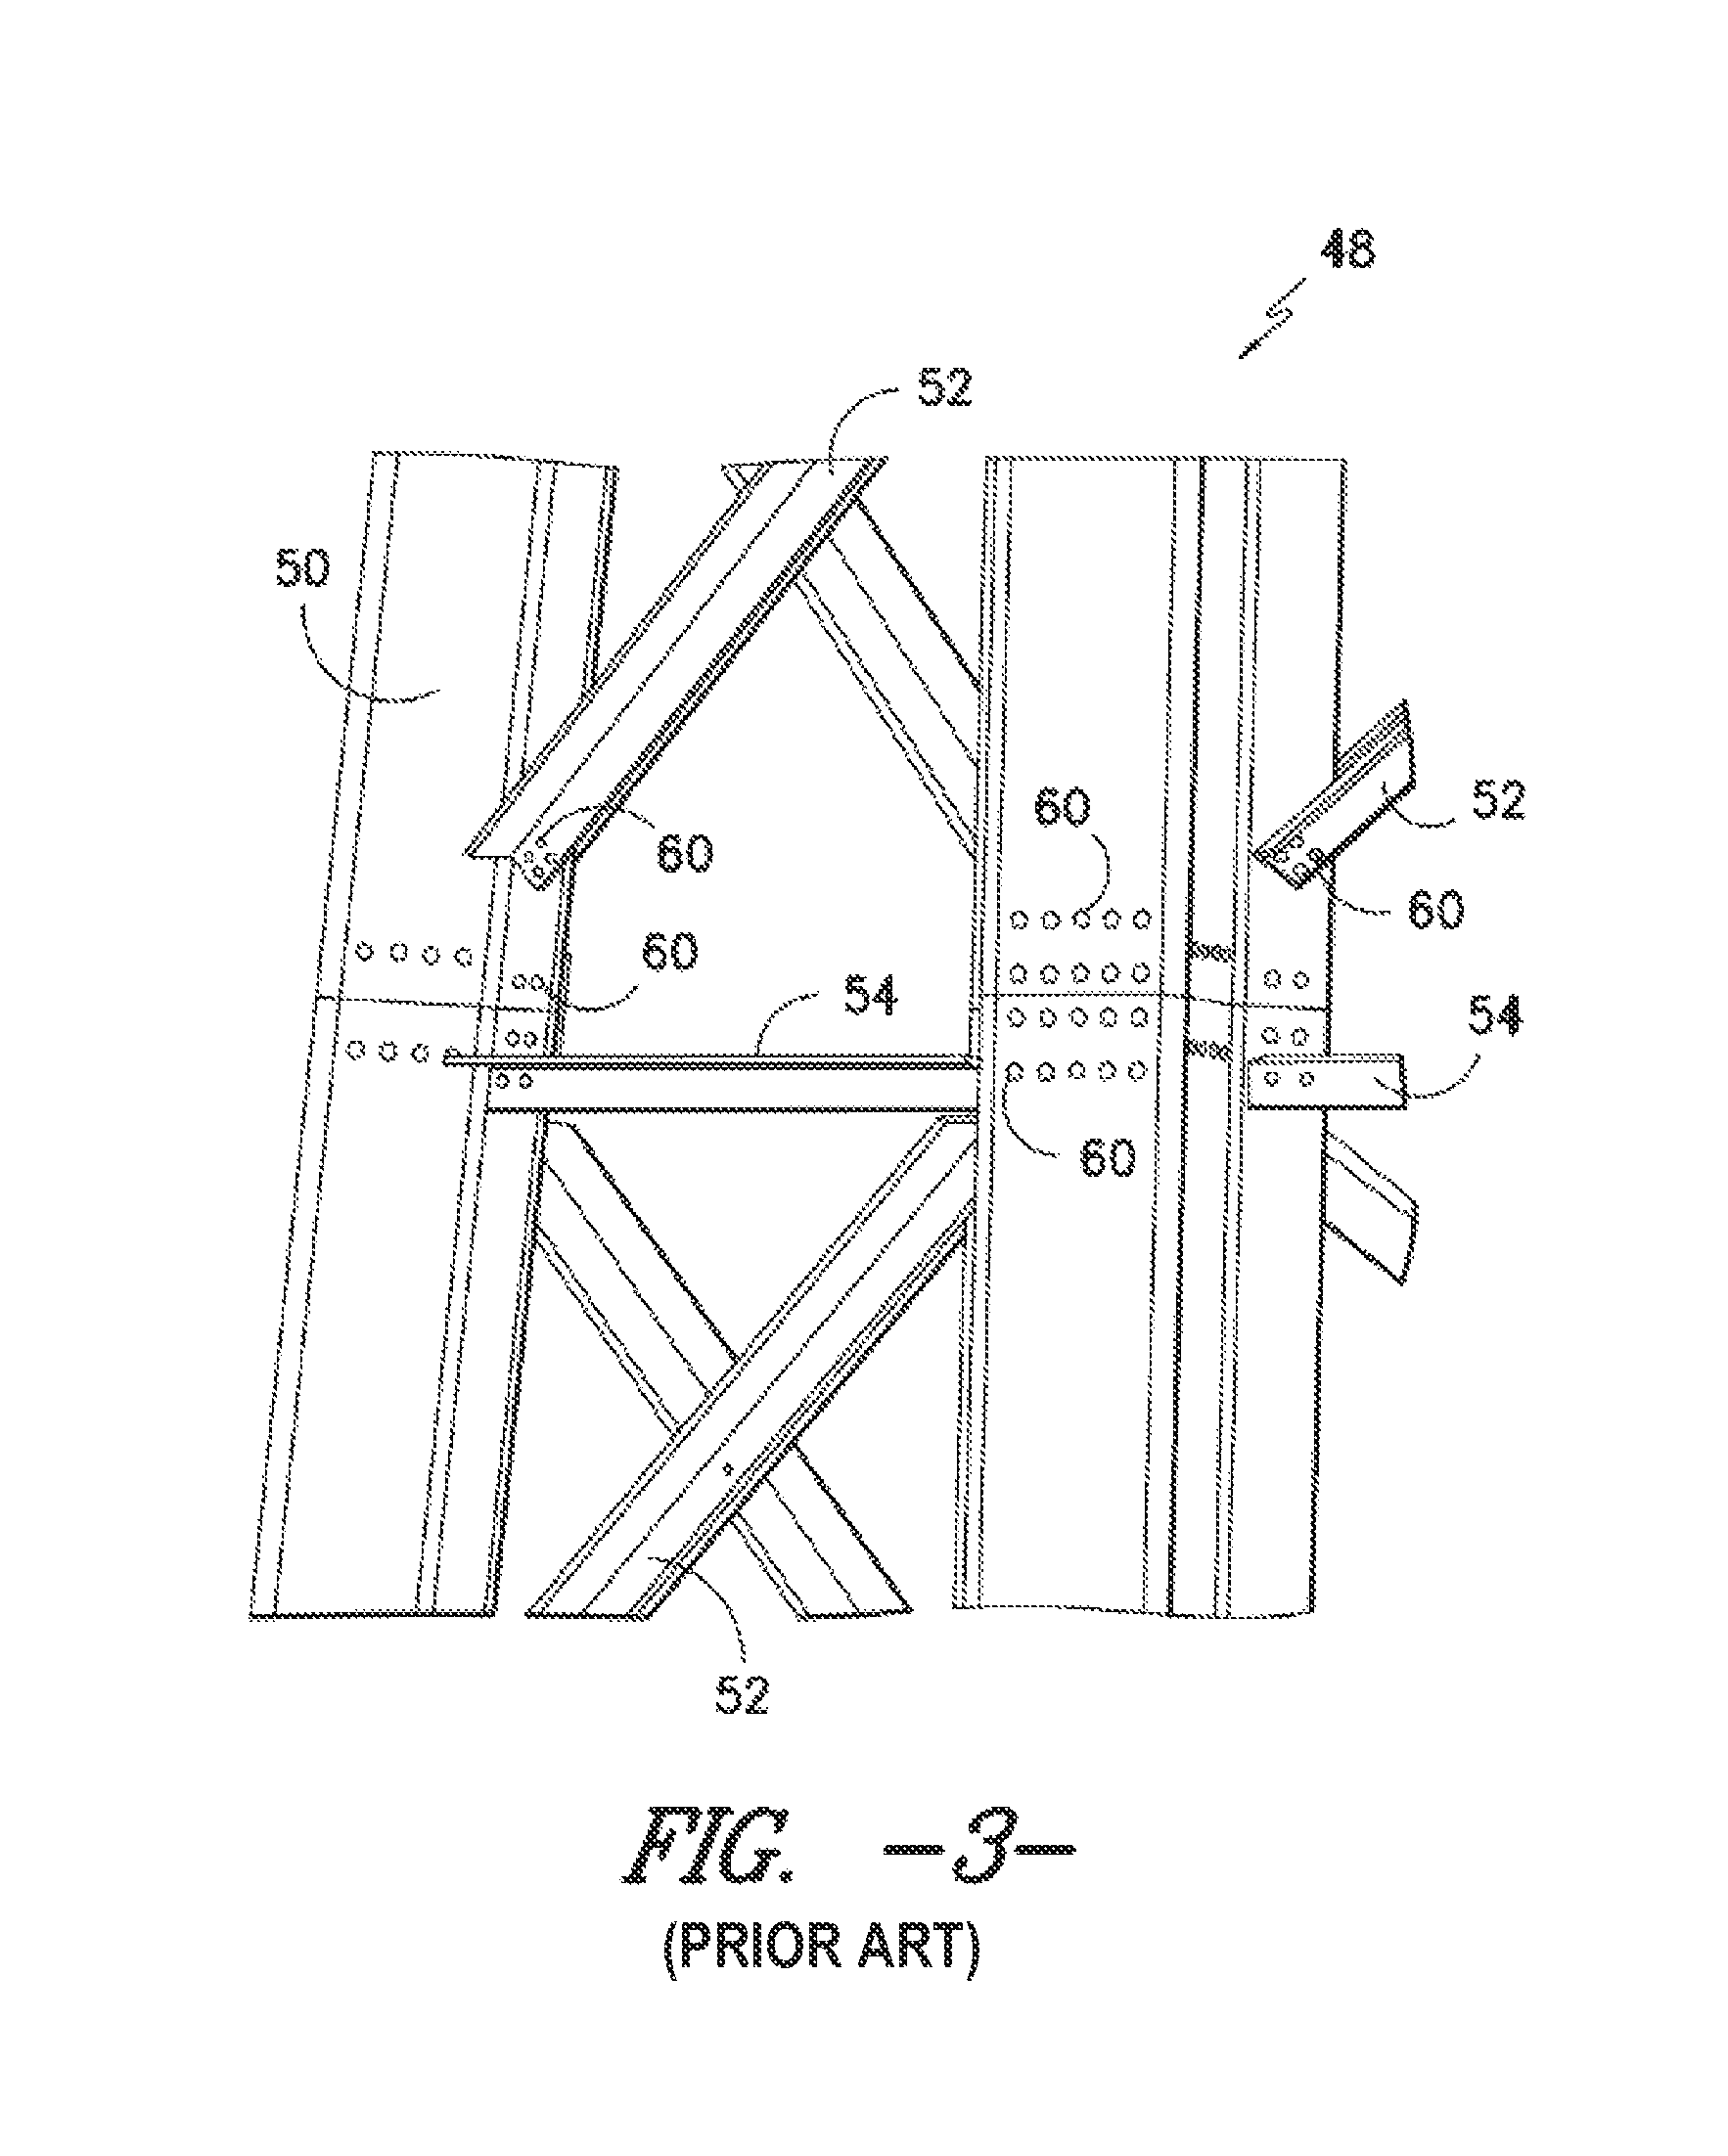 Lattice tower assembly for a wind turbine